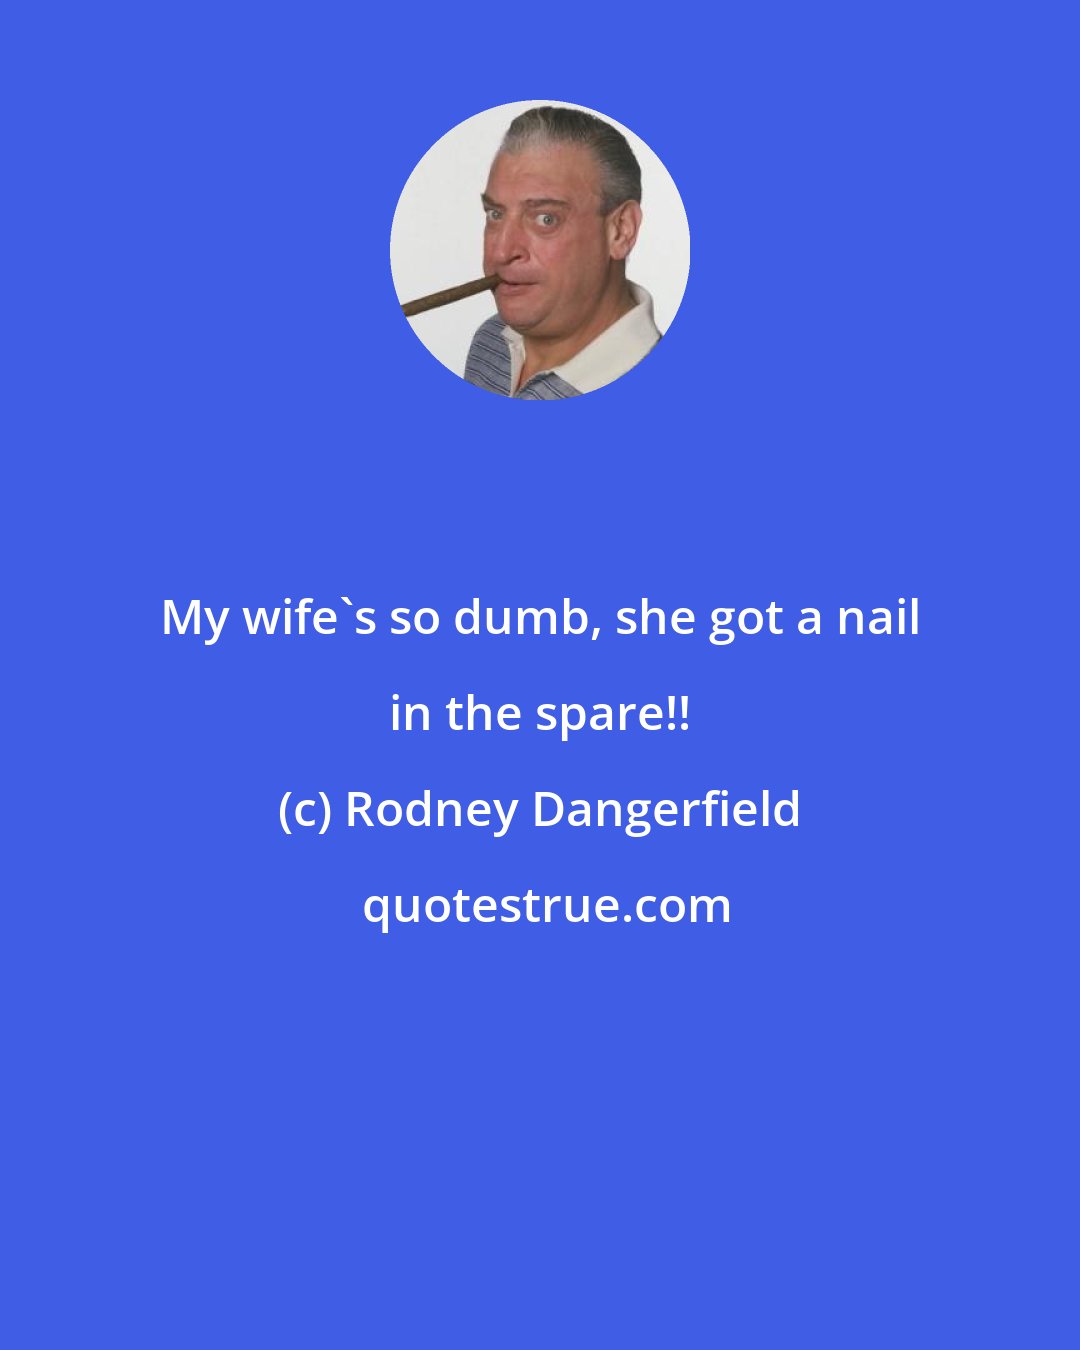 Rodney Dangerfield: My wife's so dumb, she got a nail in the spare!!